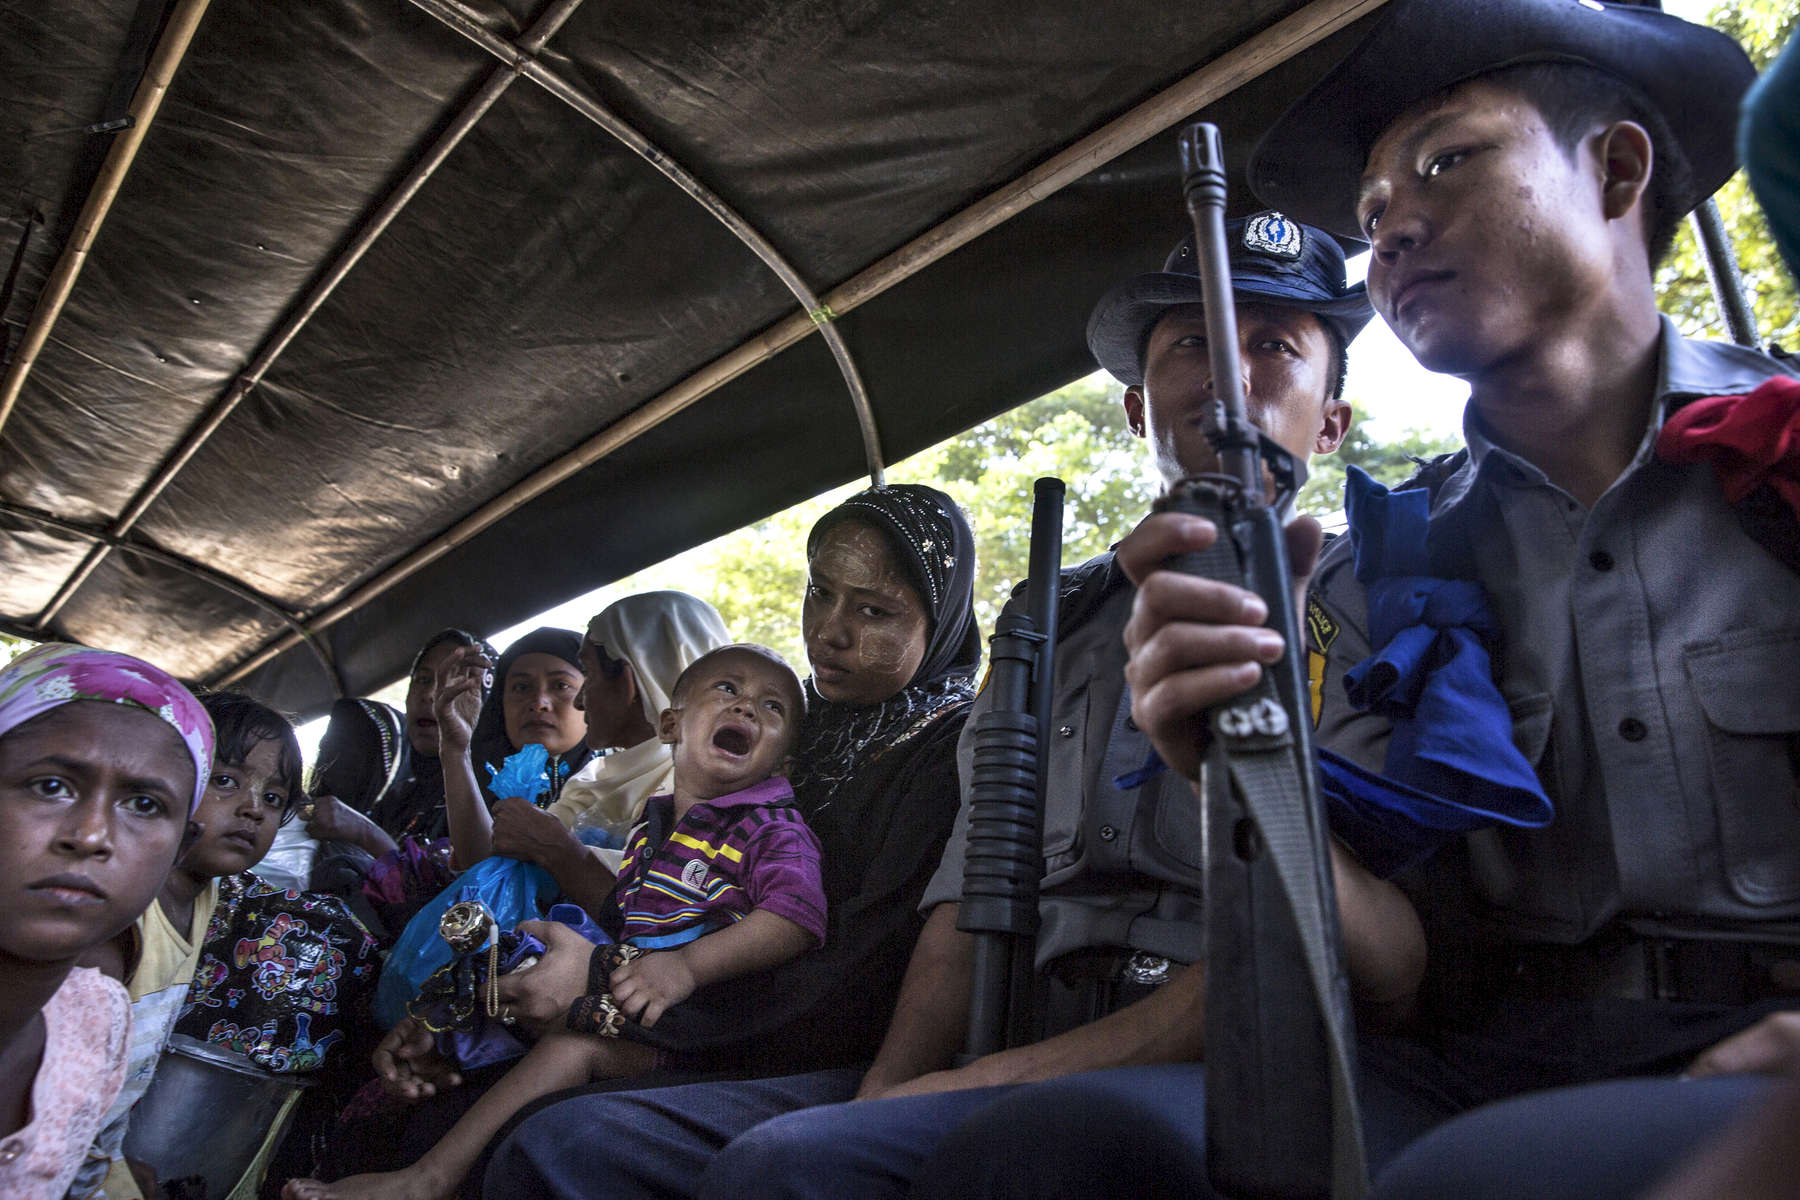 SITTWE - NOV 9: Rohingya from Aung Mingalar are escorted by Burmese police in a truck heading back to their remote community after being allowed to shop at the IDP camp market. There are no facilities in the Aung Mingalar area so many depend on this weekly trip.(Paula Bronstein for The Washington Post via Getty Images)